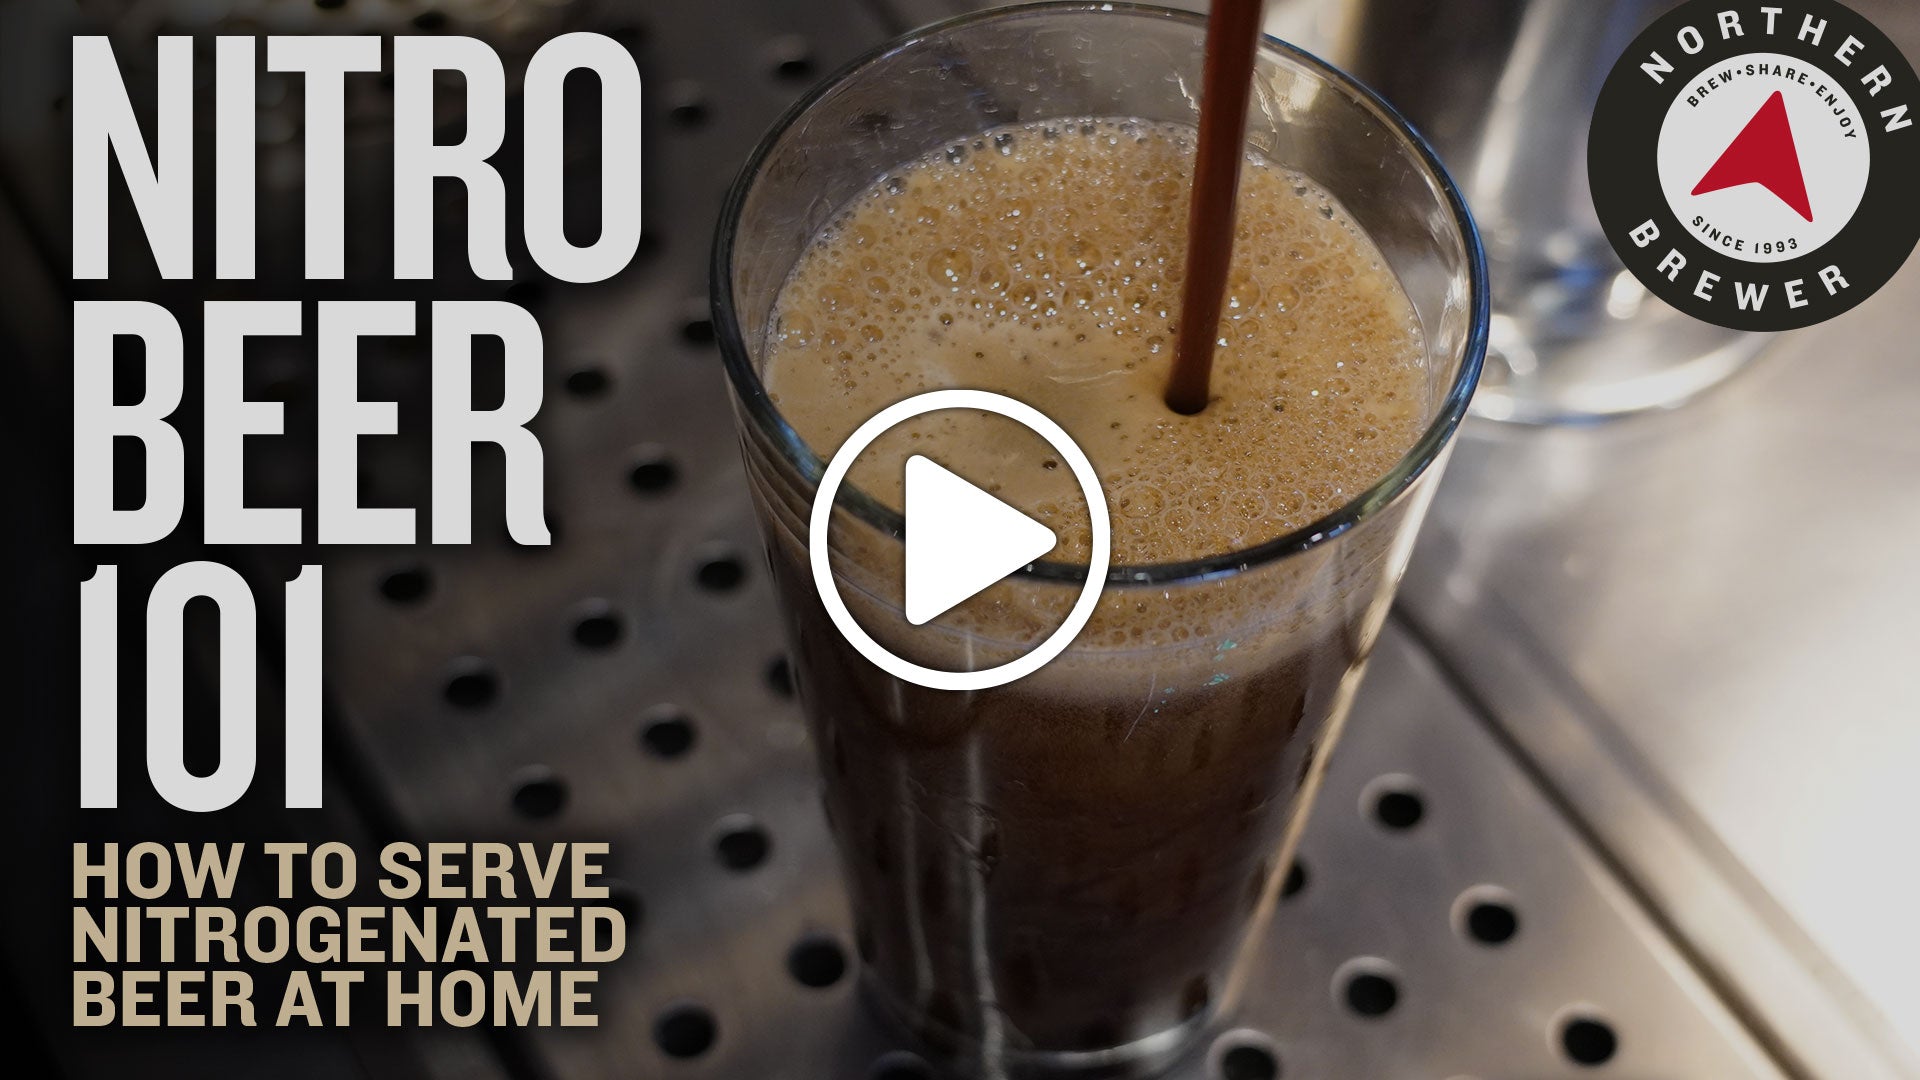 Still image for YouTube video that says Nitro Beer 101 How to Serve Nitrogenated Beer at Home